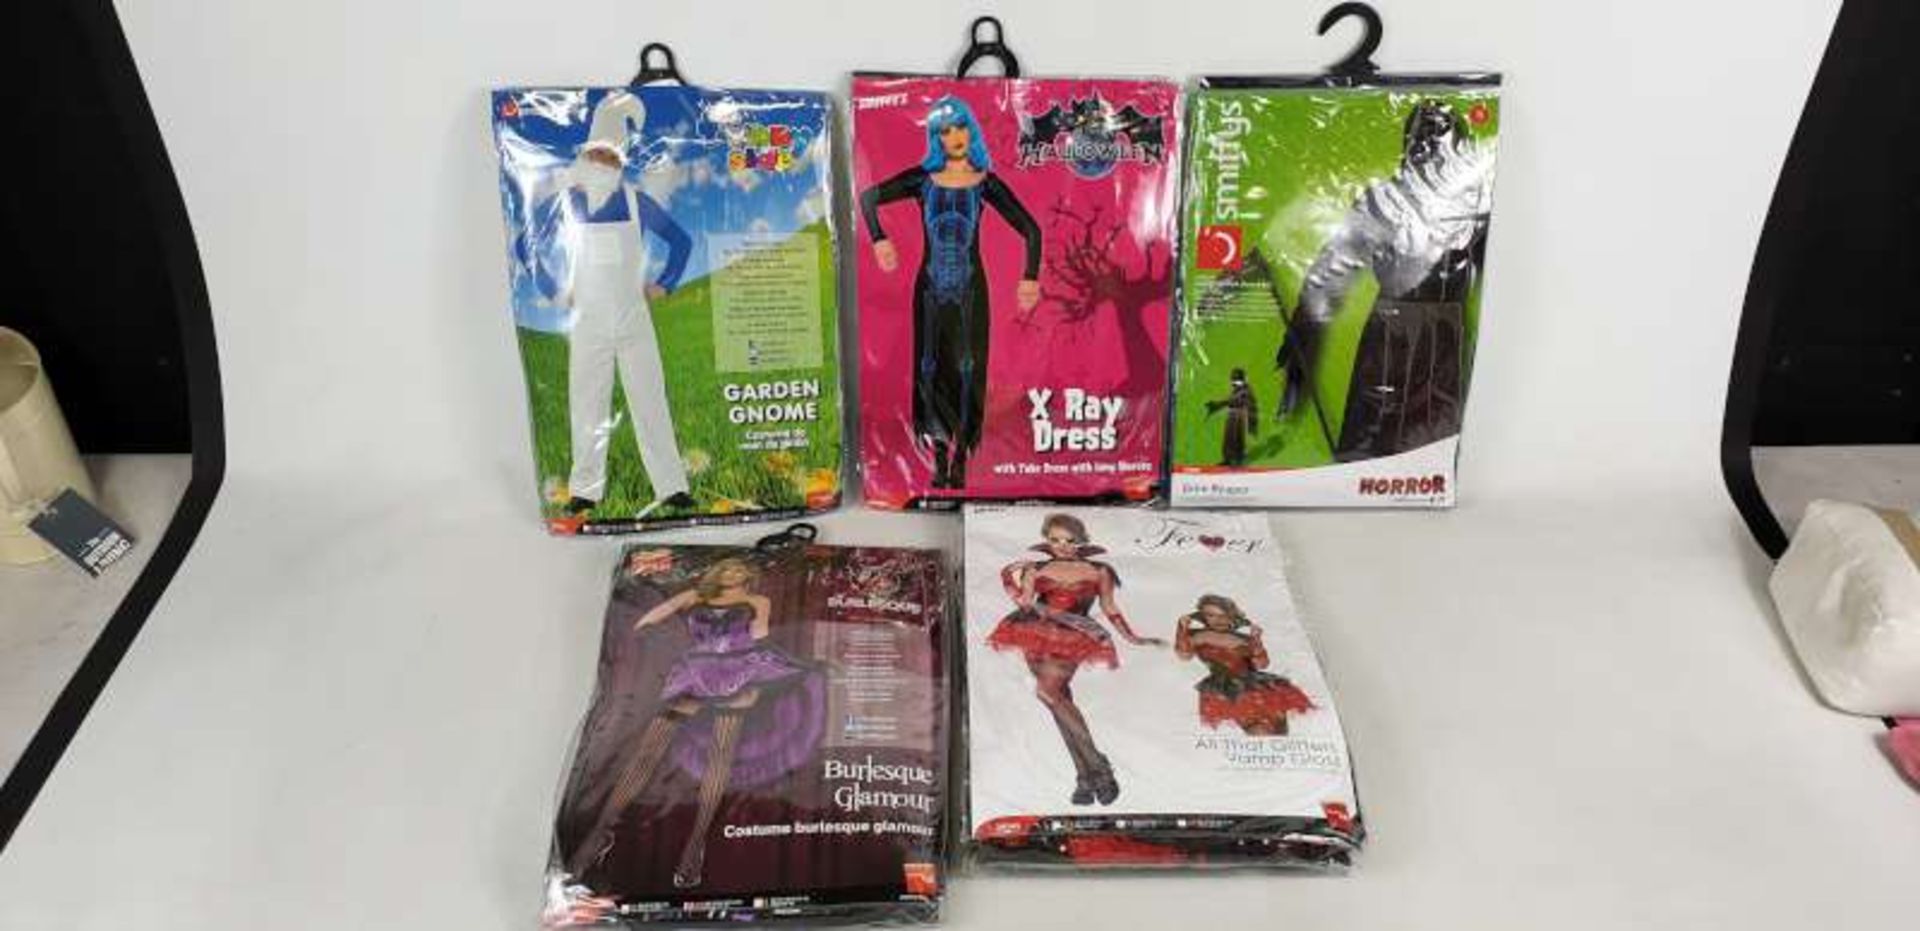 24 X BRAND NEW SMIFFYS / FEVER ADULT COSTUMES IN VARIOUS STYLES IN 1 BOX